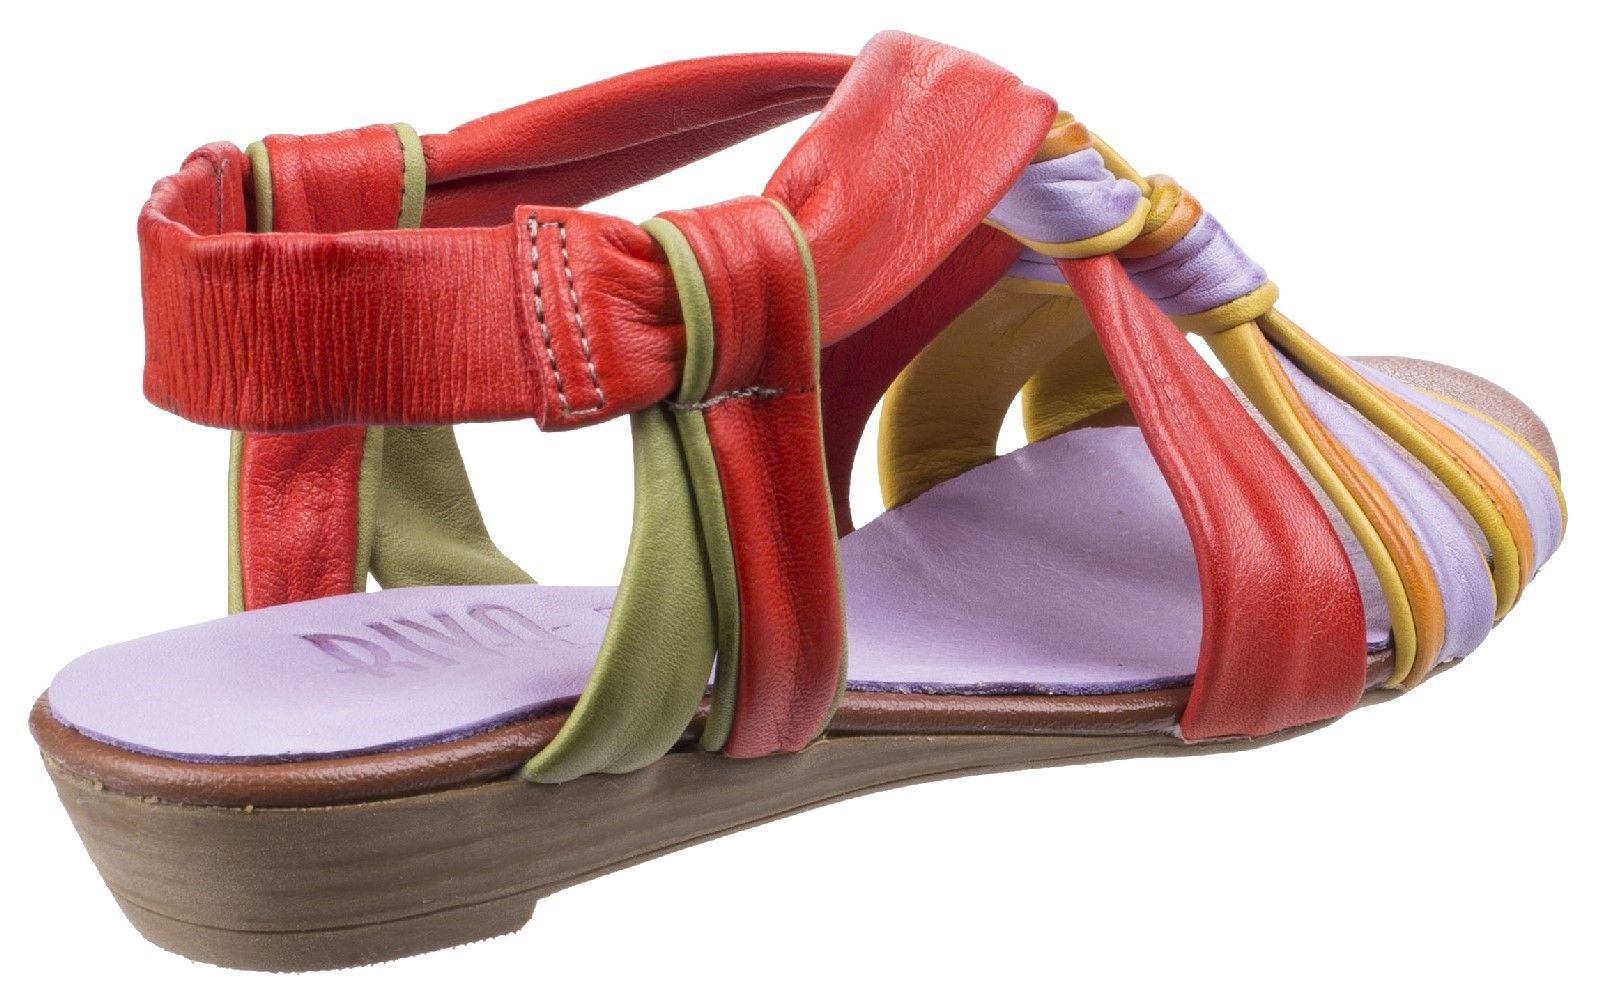 Riva brings in the sunshine for this summer with this beautiful range of multi-coloured strappy sandals. An array of colours meet supple leathers in this easy packable holiday design. Womens strappy sandal wrapping supple soft leathers. 
Multi coloured design ideal for beachwear and welcoming sunshine. 
Uppers flatten suitably for suitcase packing or beach bag fitting. 
Comfortable open toe design. 
Easy slip on with sling back strap.